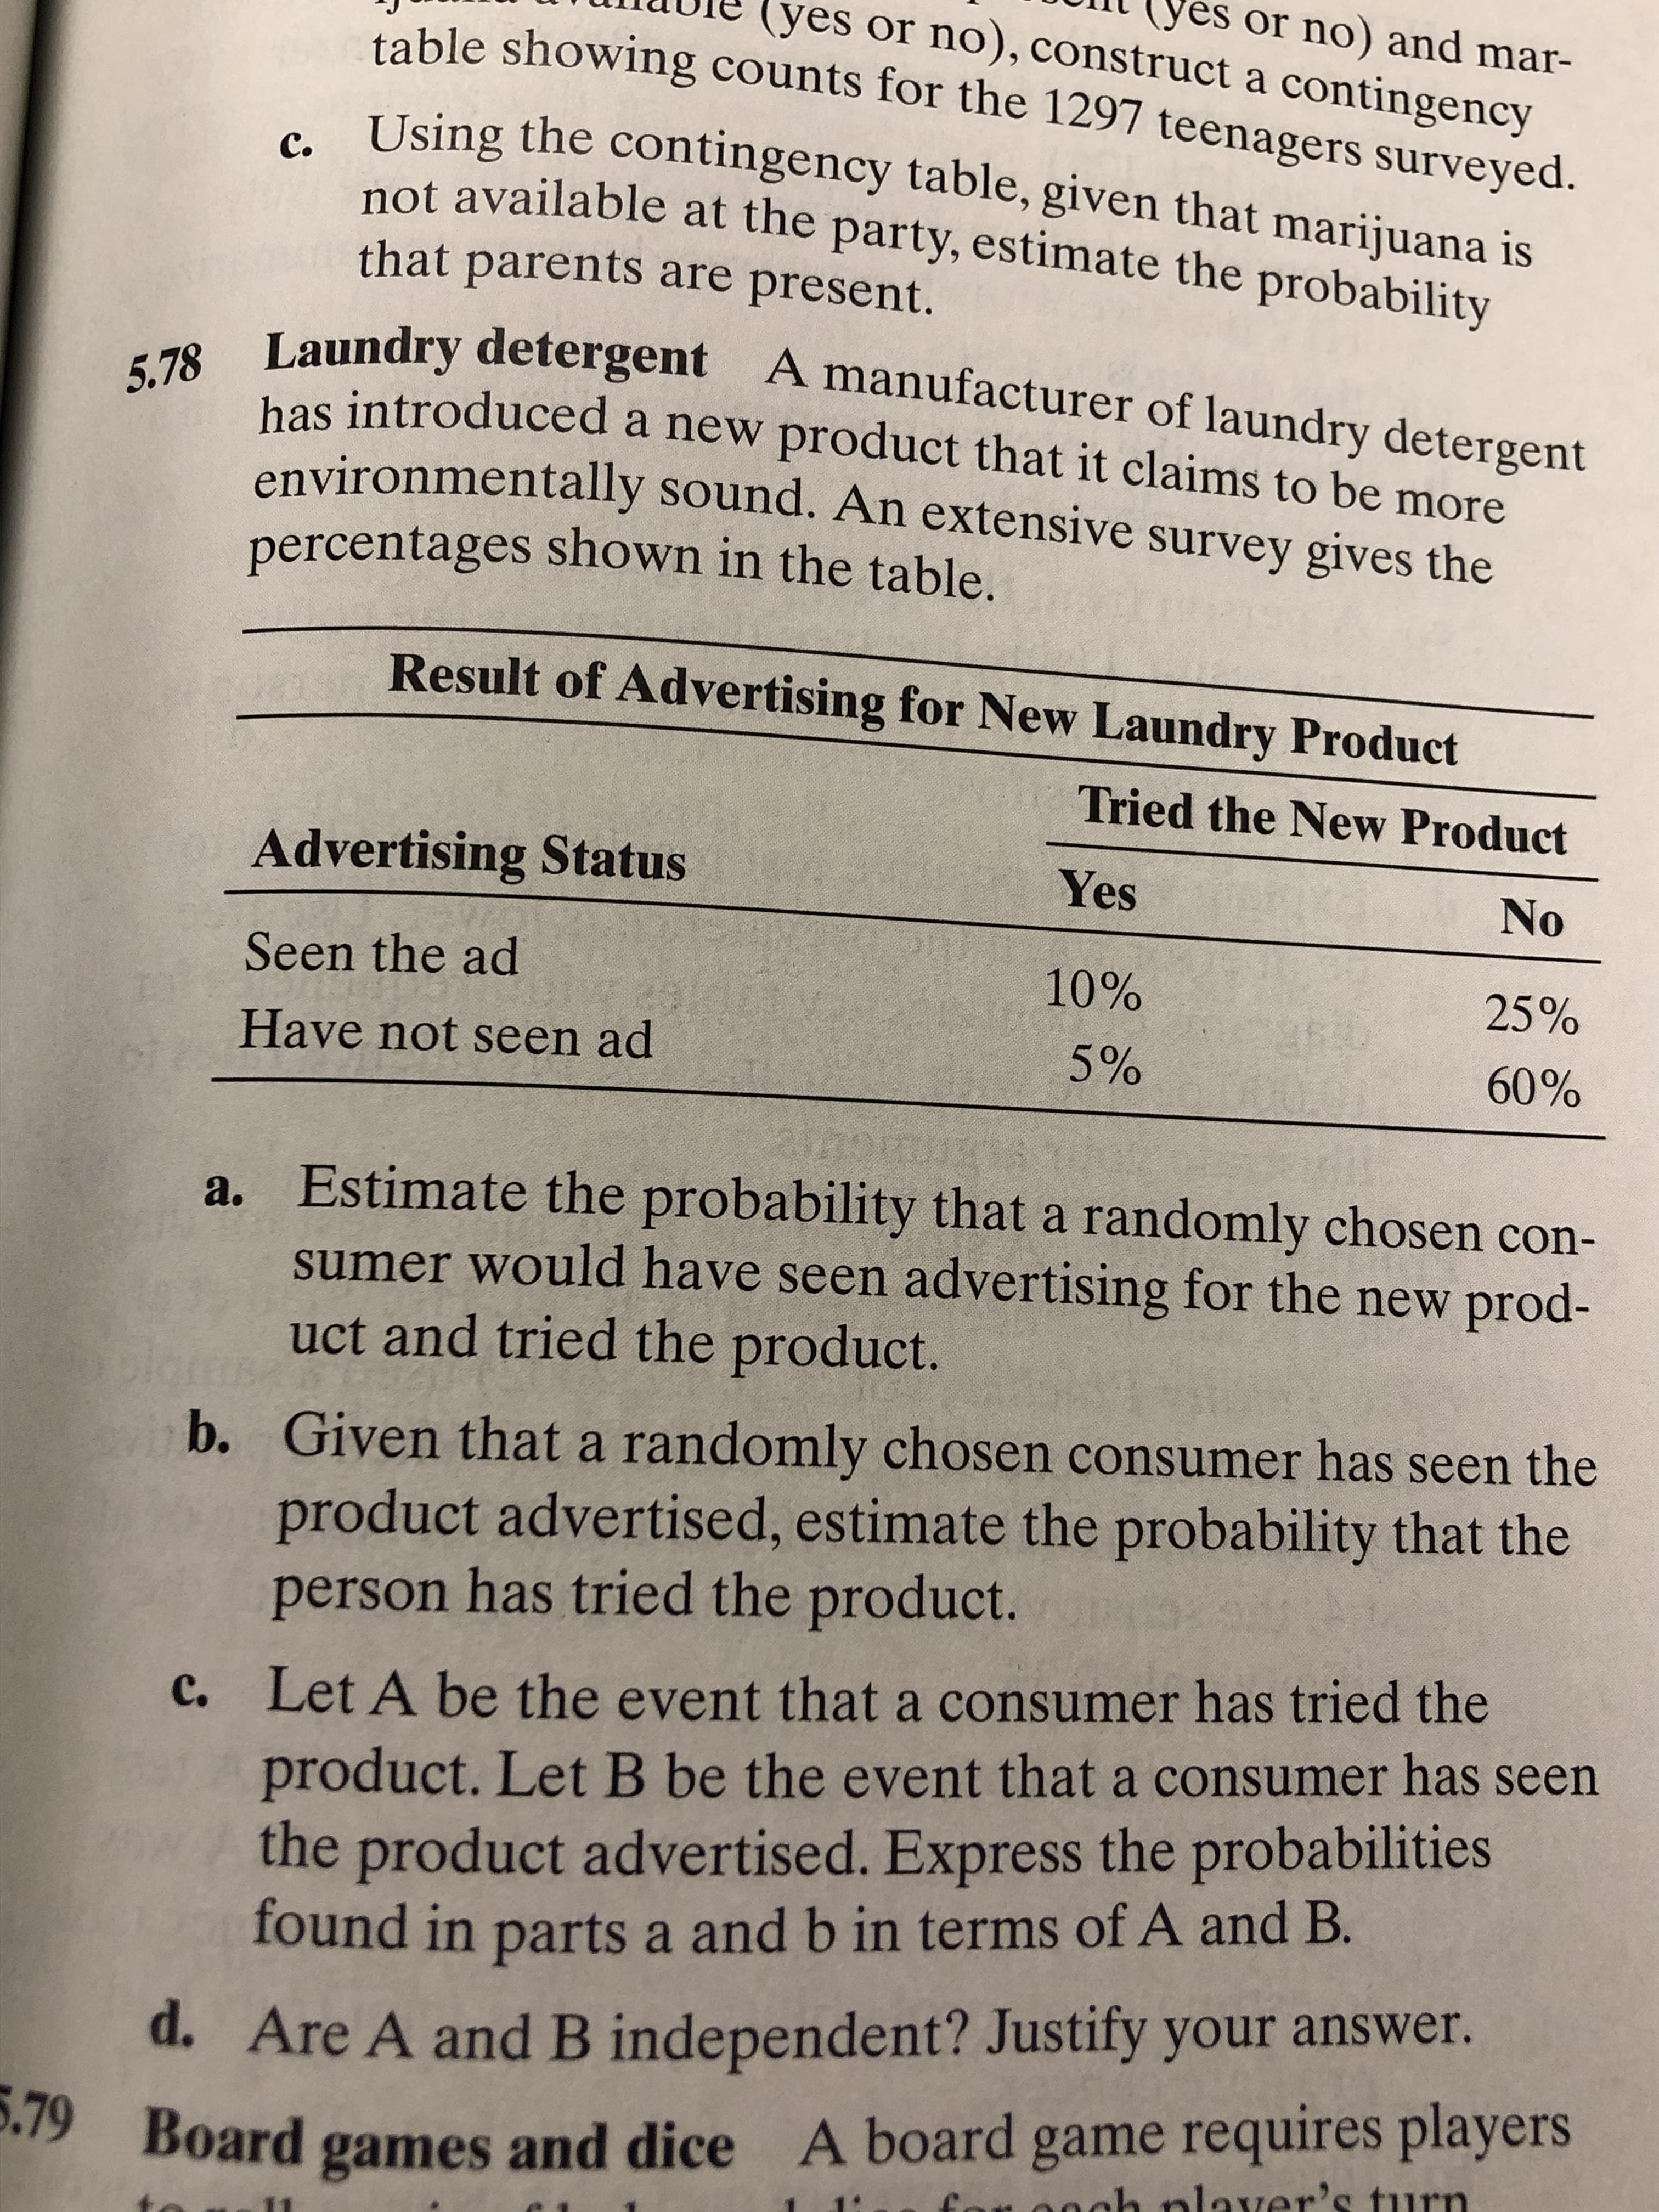 yes or no) and mar-
lyes or no), construct a contingency
table showing counts for the 1297 teenagers surveyed.
c. Using the contingency table, given that marijuana is
not available at the party, estimate the probability
that parents are present.
Laundry detergent A manufacturer of laundry detergent
has introduced a new product that it claims to be more
environmentally sound. An extensive survey gives the
percentages shown in the table.
5.78
Result of Advertising for New Laundry Product
Tried the New Product
Advertising Status
Yes
No
Seen the ad
10%
25%
Have not seen ad
5%
60%
a. Estimate the probability that a randomly chosen con-
sumer would have seen advertising for the new prod-
uct and tried the product.
b. Given that a randomly chosen consumer has seen the
product advertised, estimate the probability that the
person has tried the product.
Let A be the event that a consumer has tried the
c.
product. LetB be the event that a consumer has seen
the product advertised. Express the probabilities
found in parts a and b in terms of A and B.
d. Are A and B independent? Justify your answer.
5.79 Board games and dice A board game requires players
ech nlaver's turn
